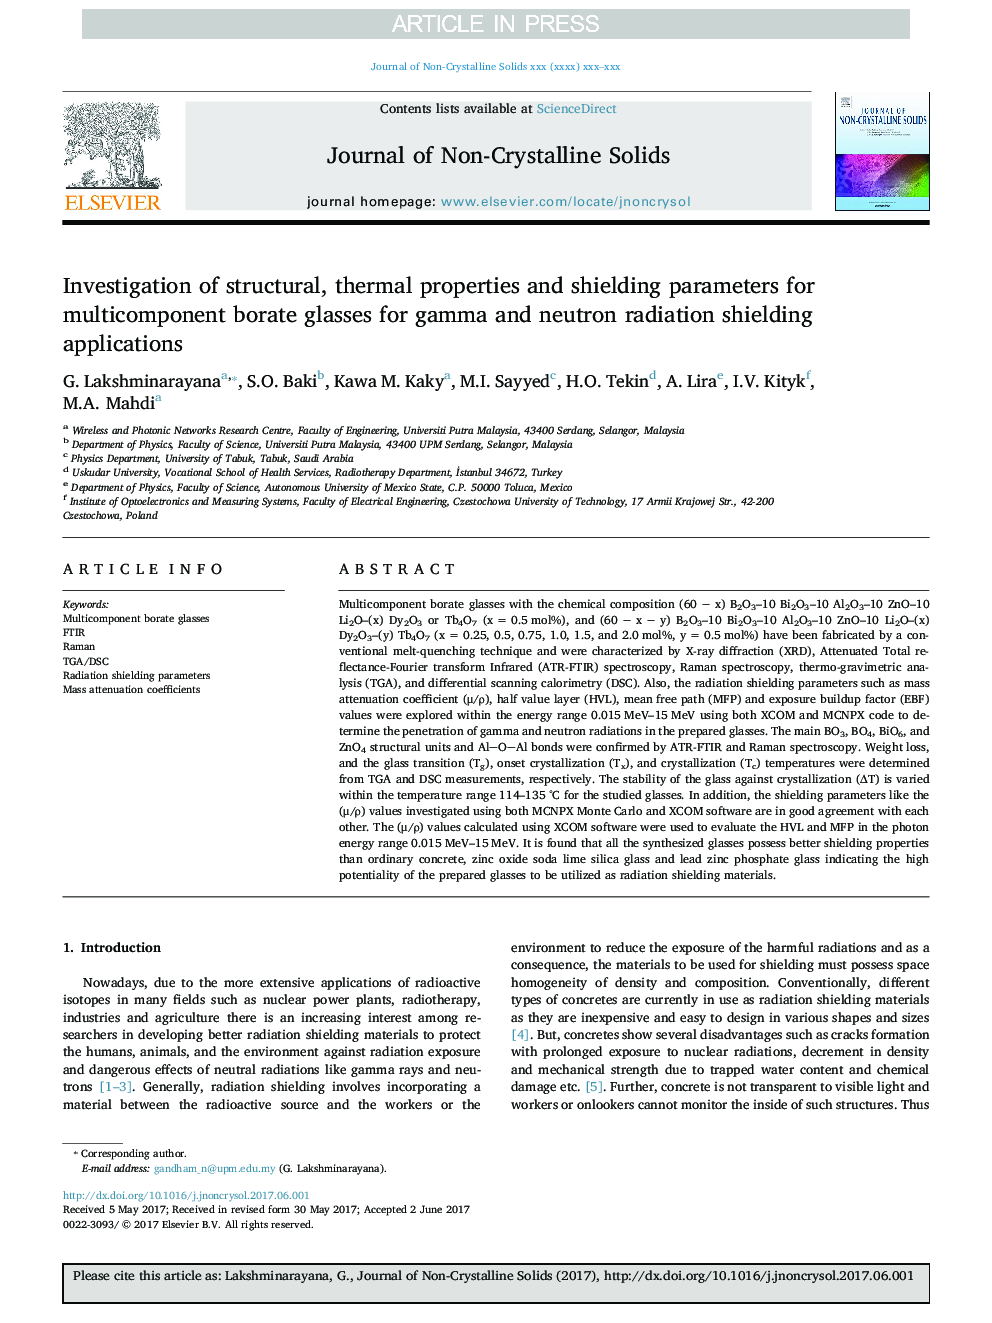 Investigation of structural, thermal properties and shielding parameters for multicomponent borate glasses for gamma and neutron radiation shielding applications